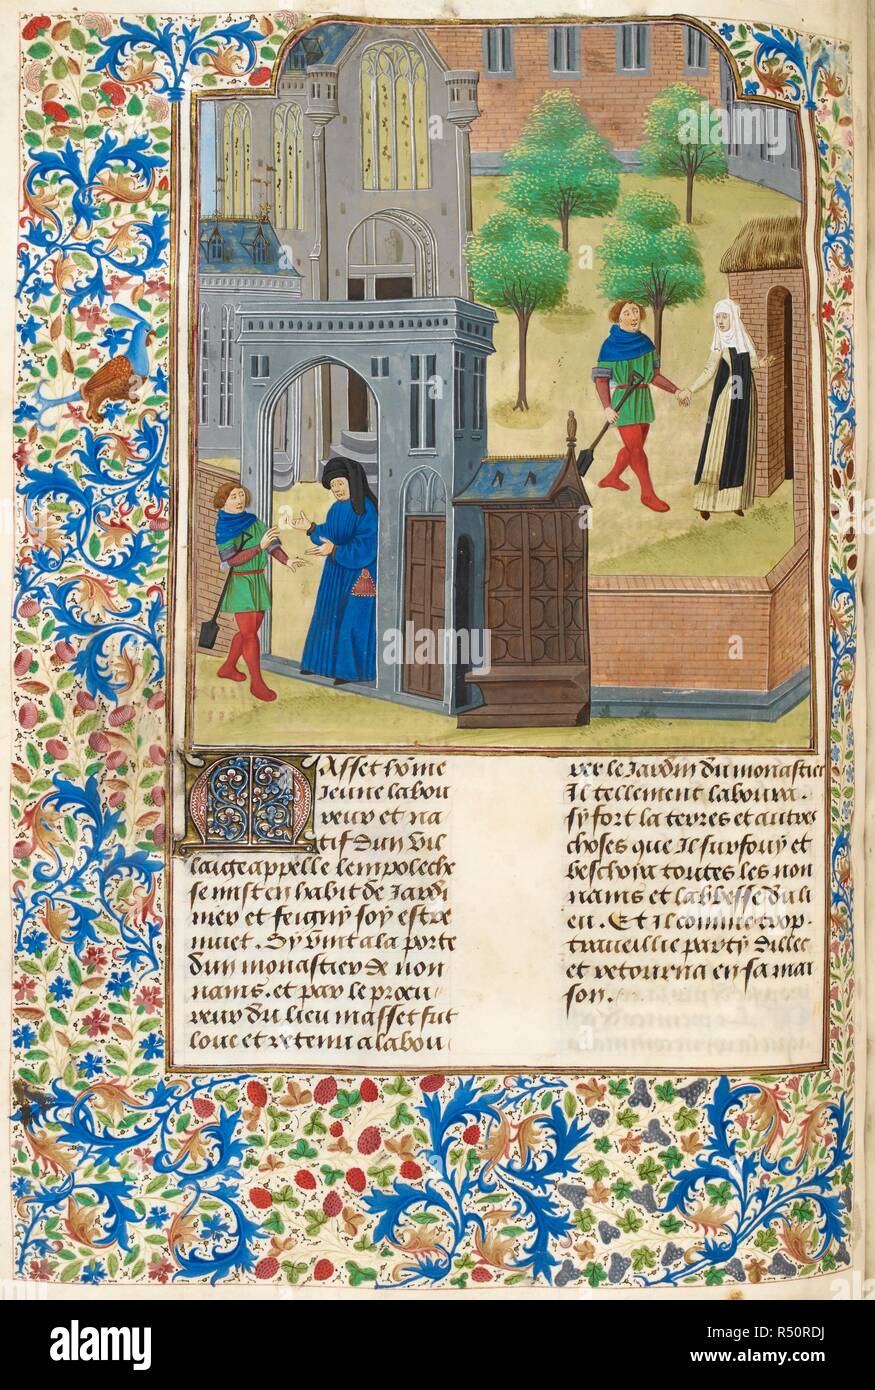 The gardener being welcomed at a door, by the owner. The gardener inside the garden holding the hand of a woman, and being led into an outbuilding. The Decameron of Boccaccio. Late 15th century. Source: Add.35322 f.121v. Language: French. Author: BOCCACCIO, GIOVANNI. Master of the Harley Froissart. Premierfait, Laurent. Stock Photo